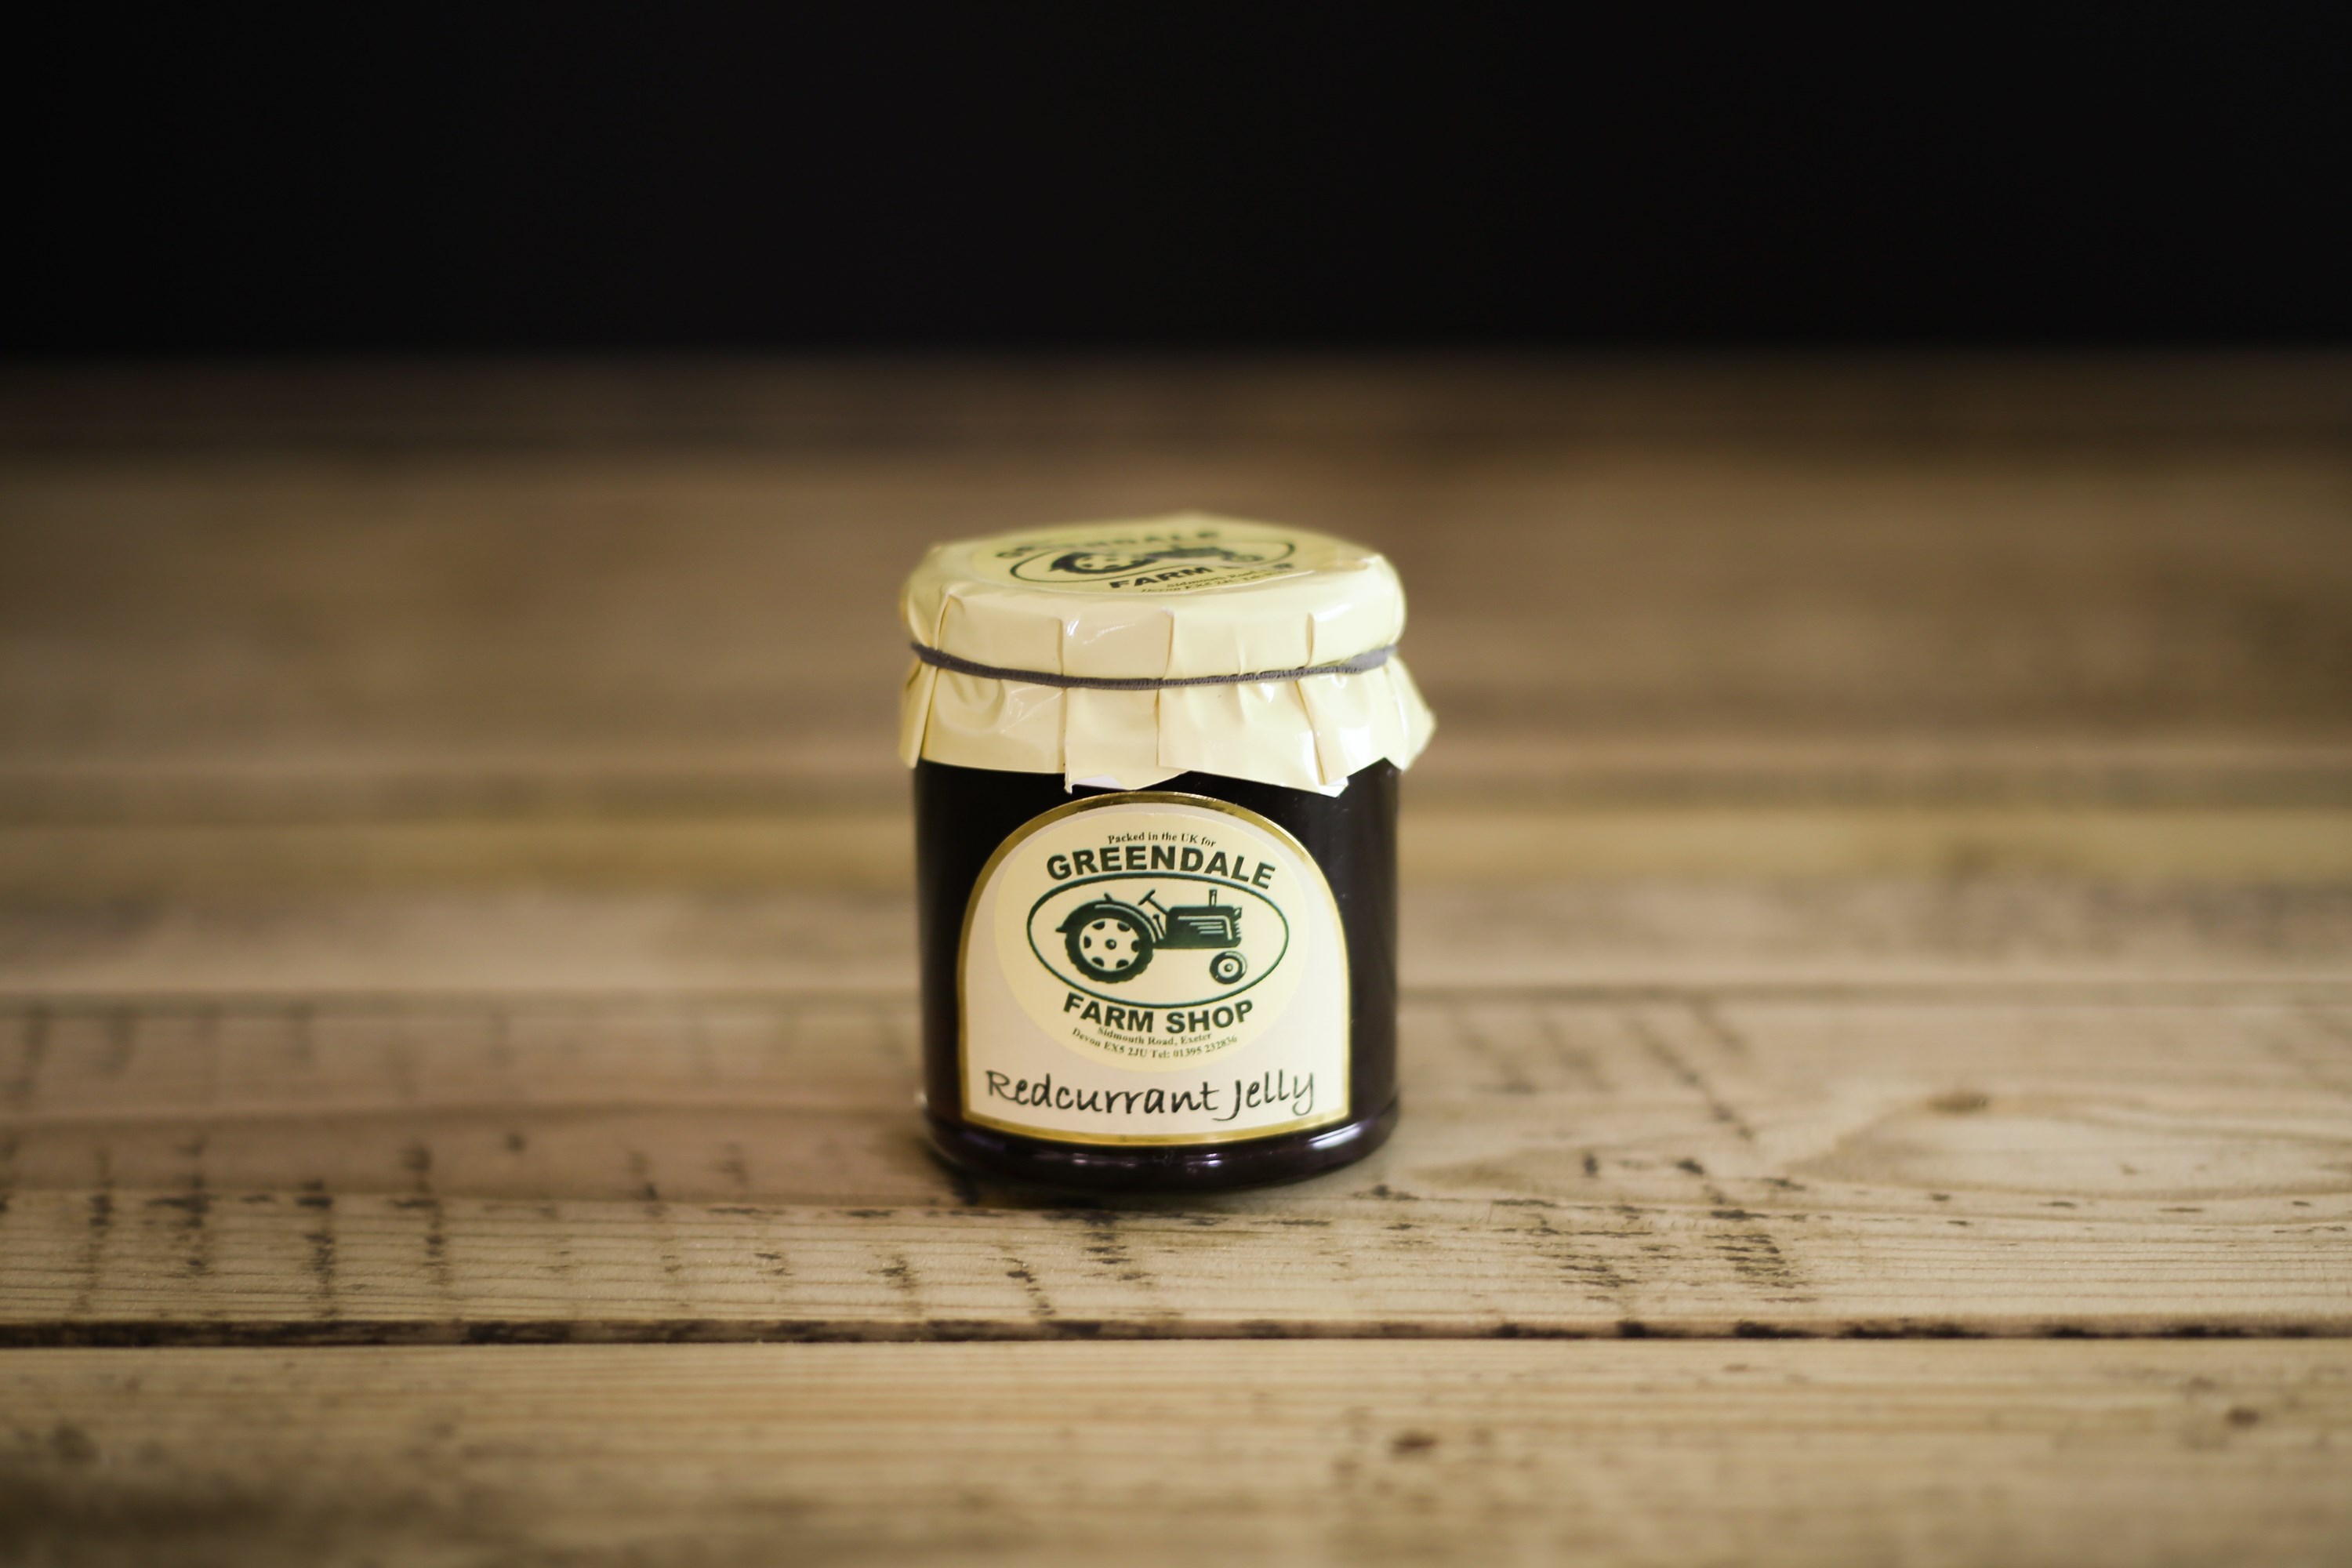 Greendale Redcurrant Jelly